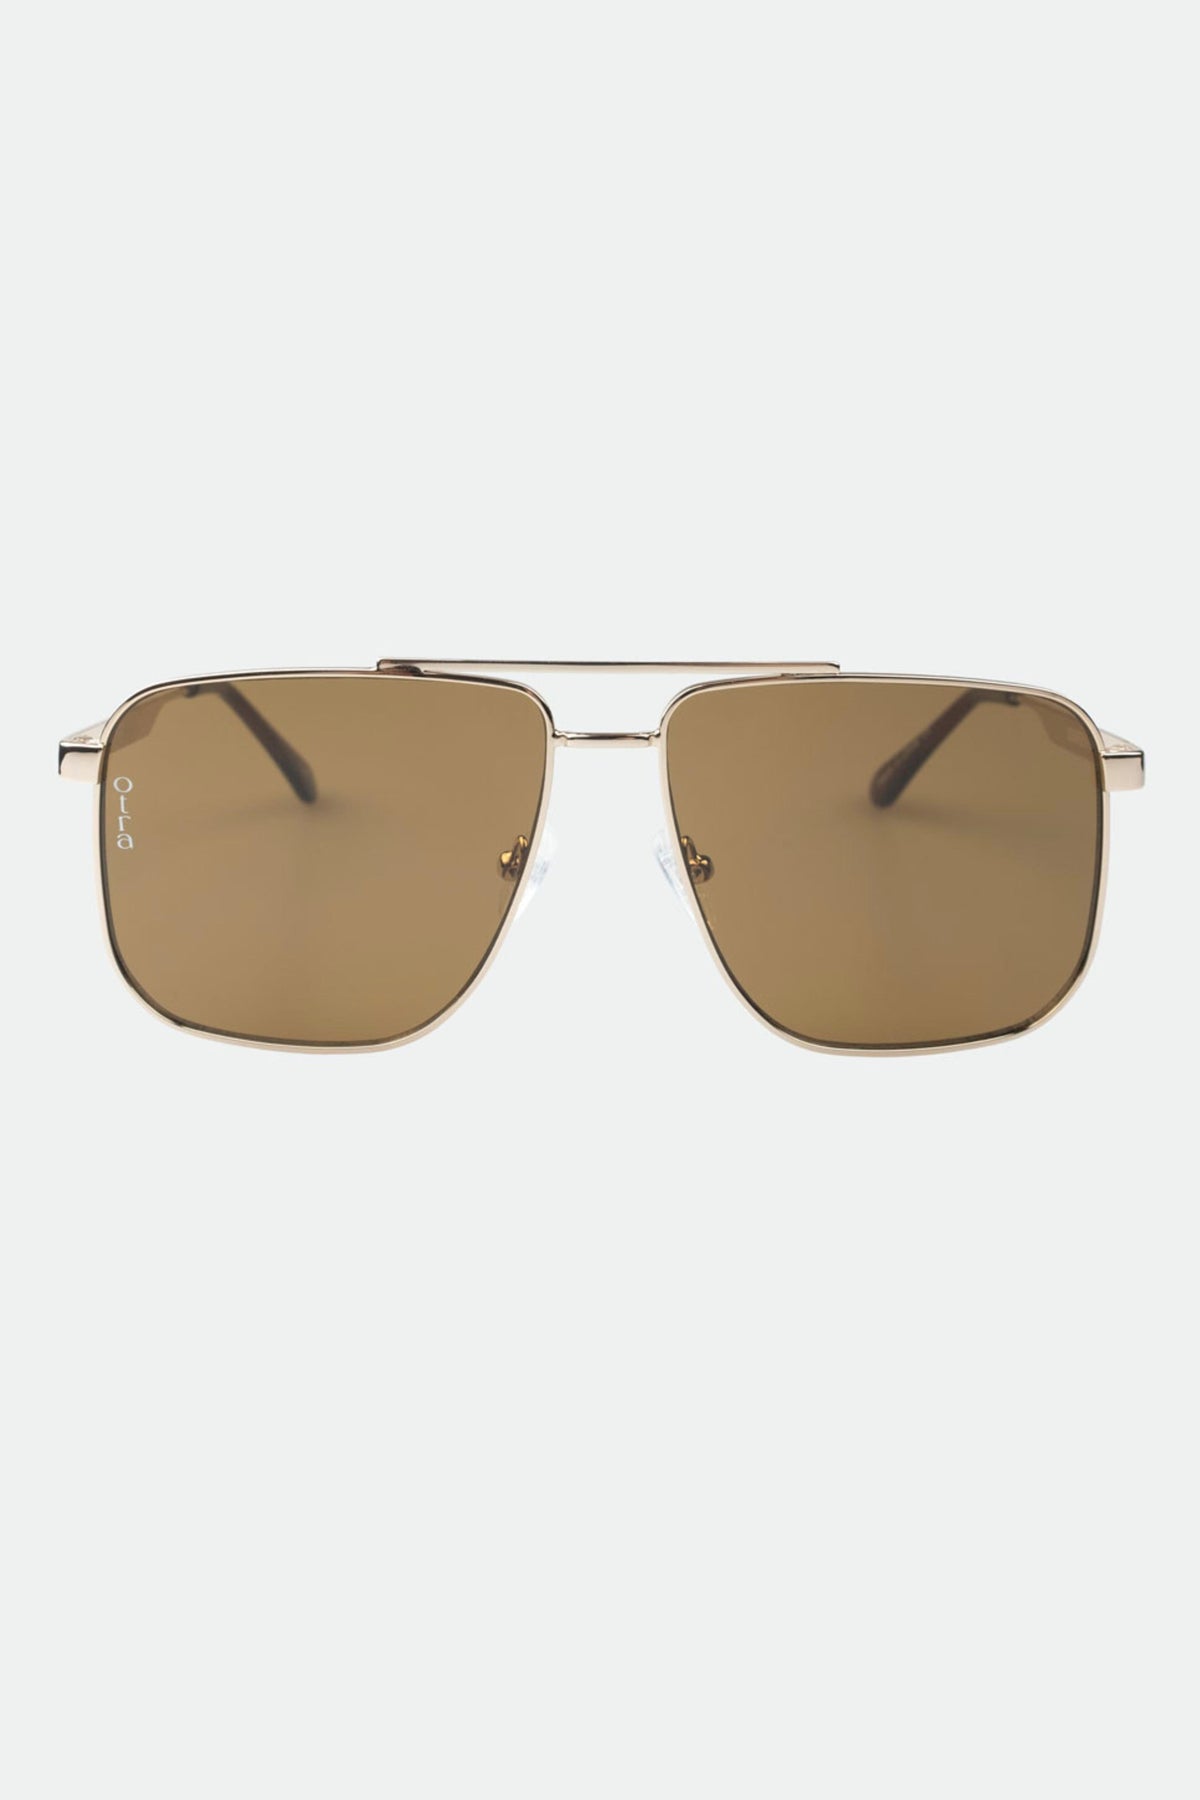 Sorrento Gold/Brown Sunnies